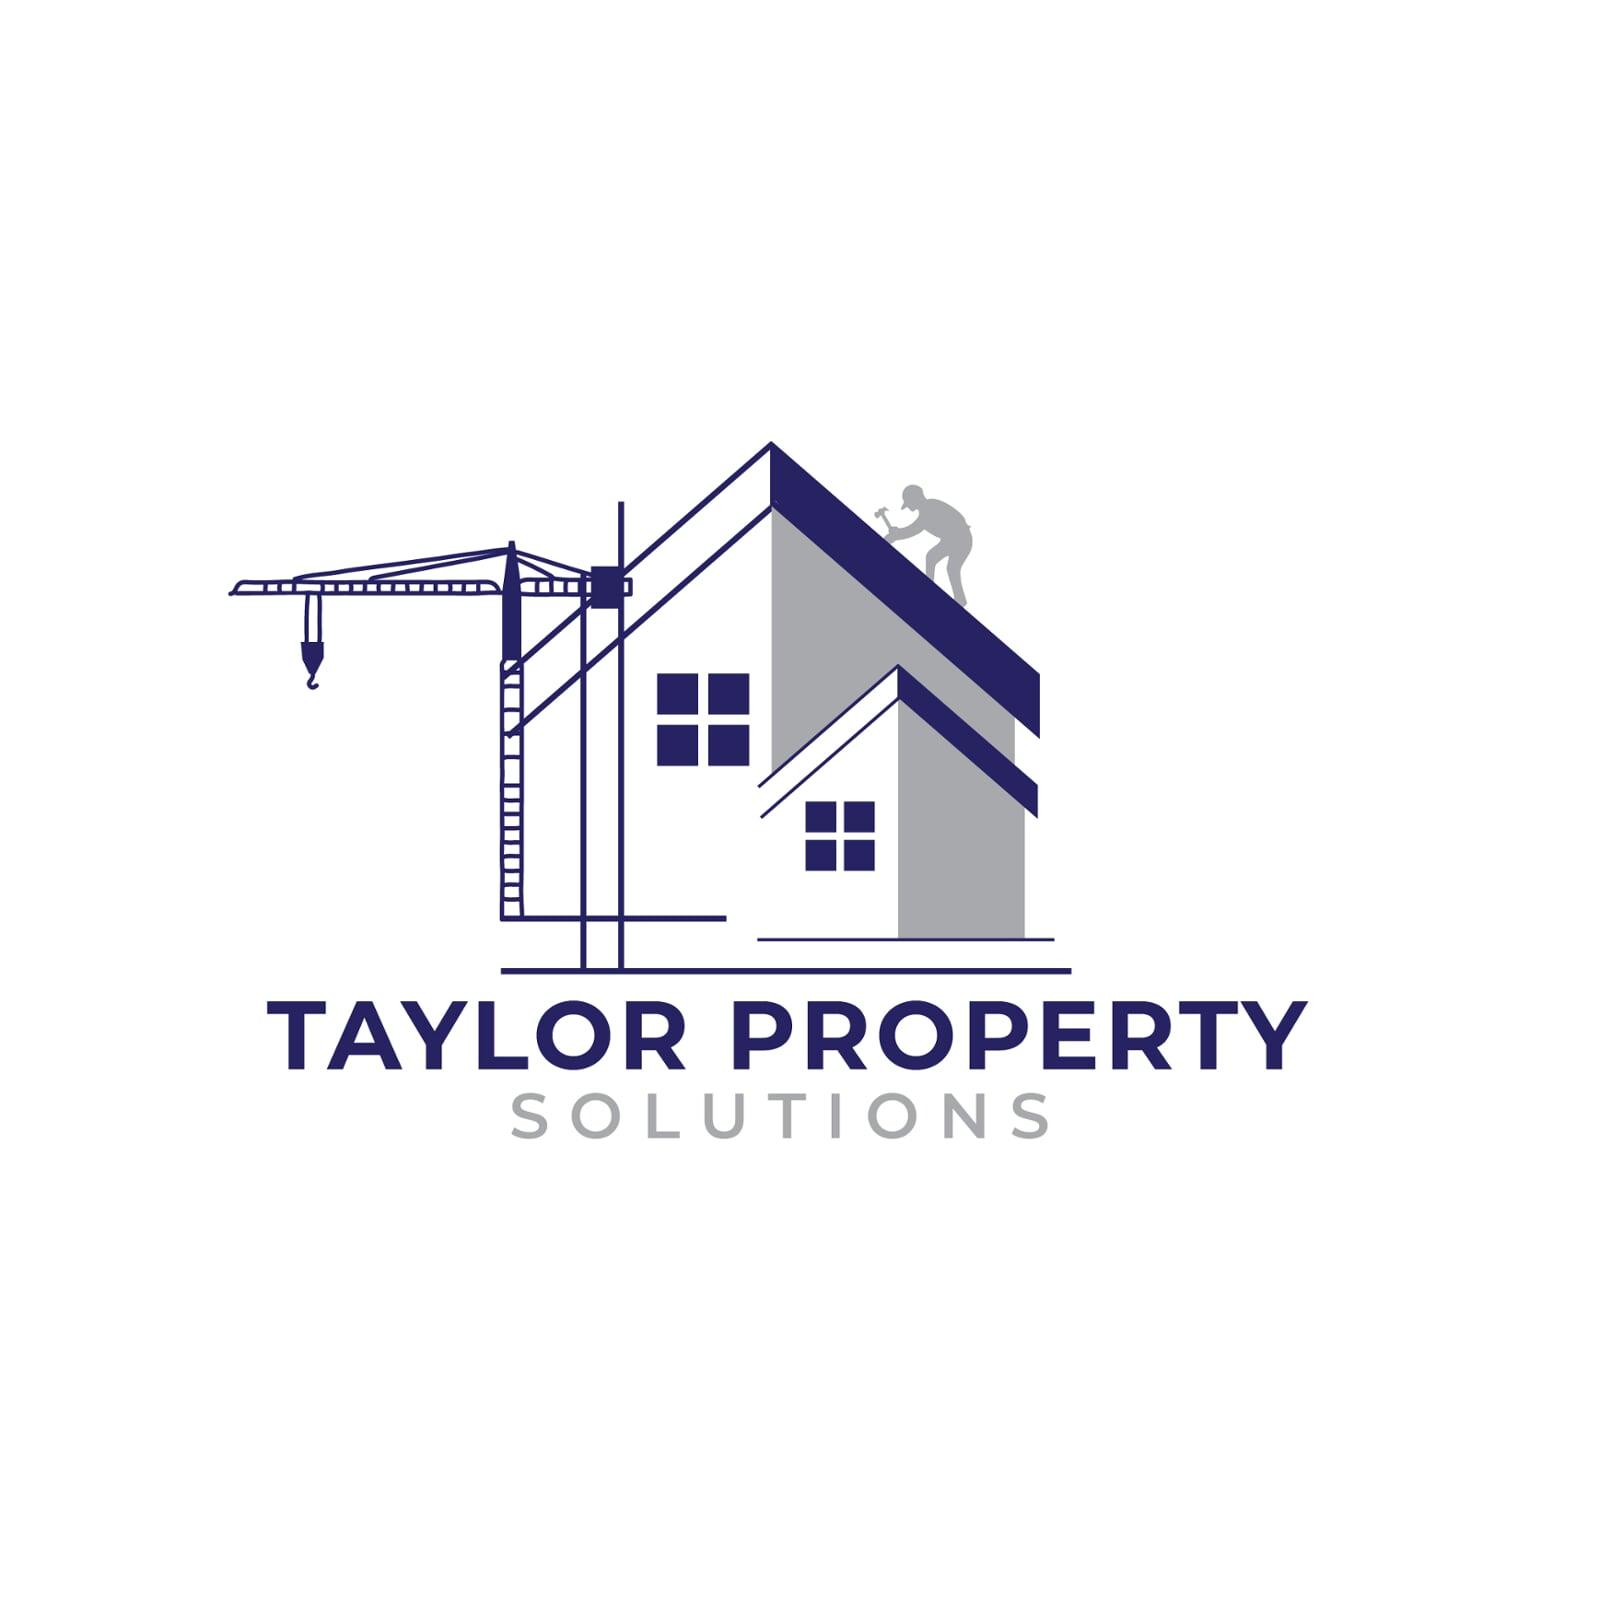 Taylor Property Solutions